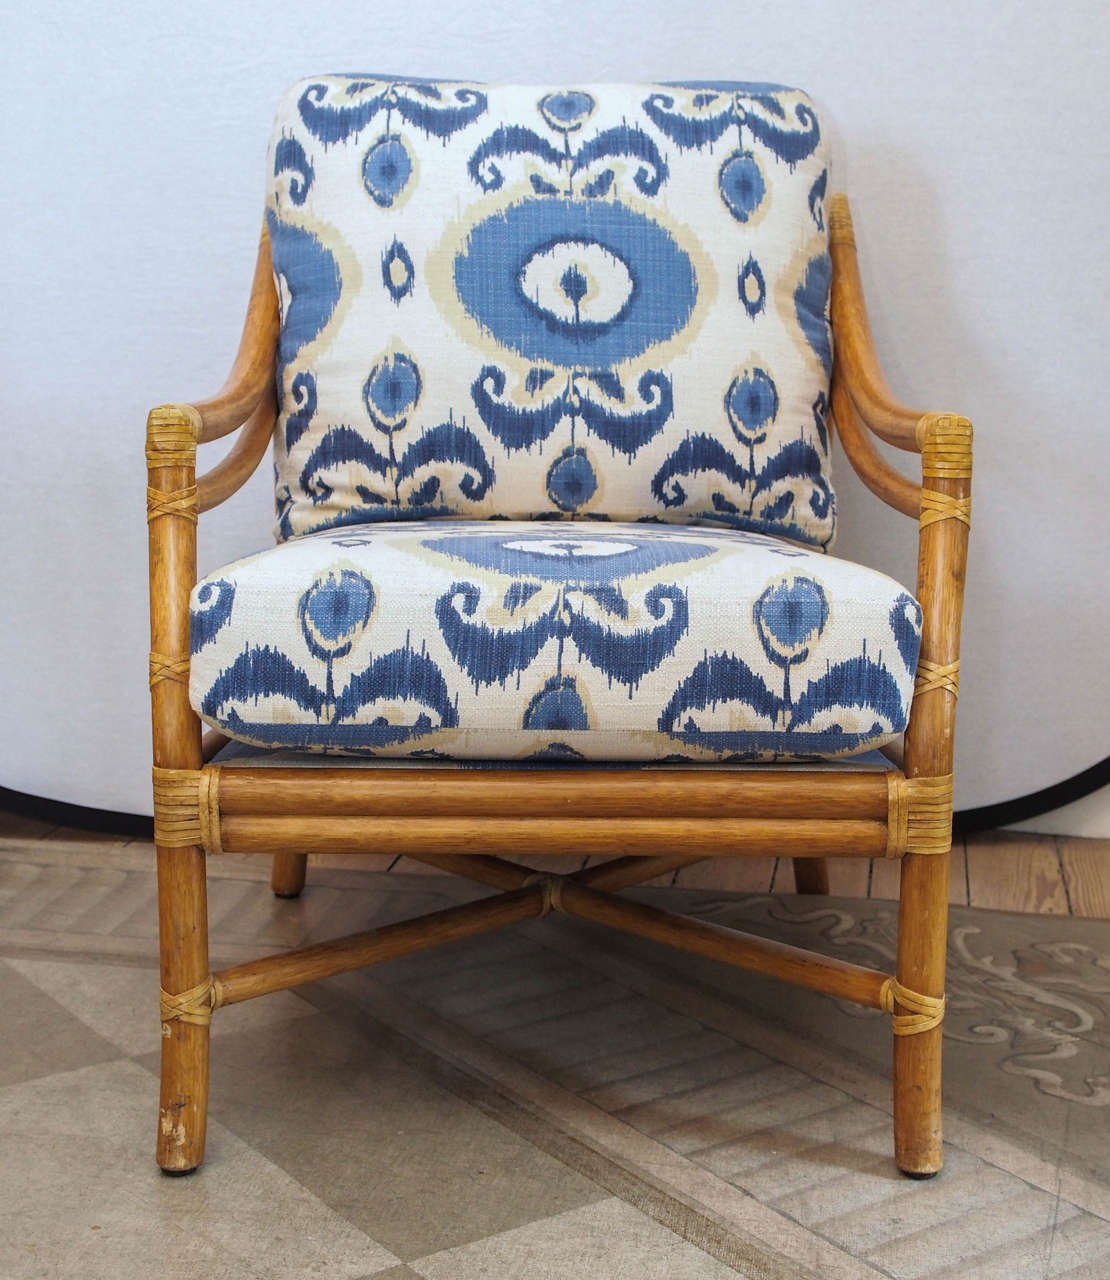 Vintage bamboo rattan lounge chair with new down blend cushions and new blue Ikat upholstery.